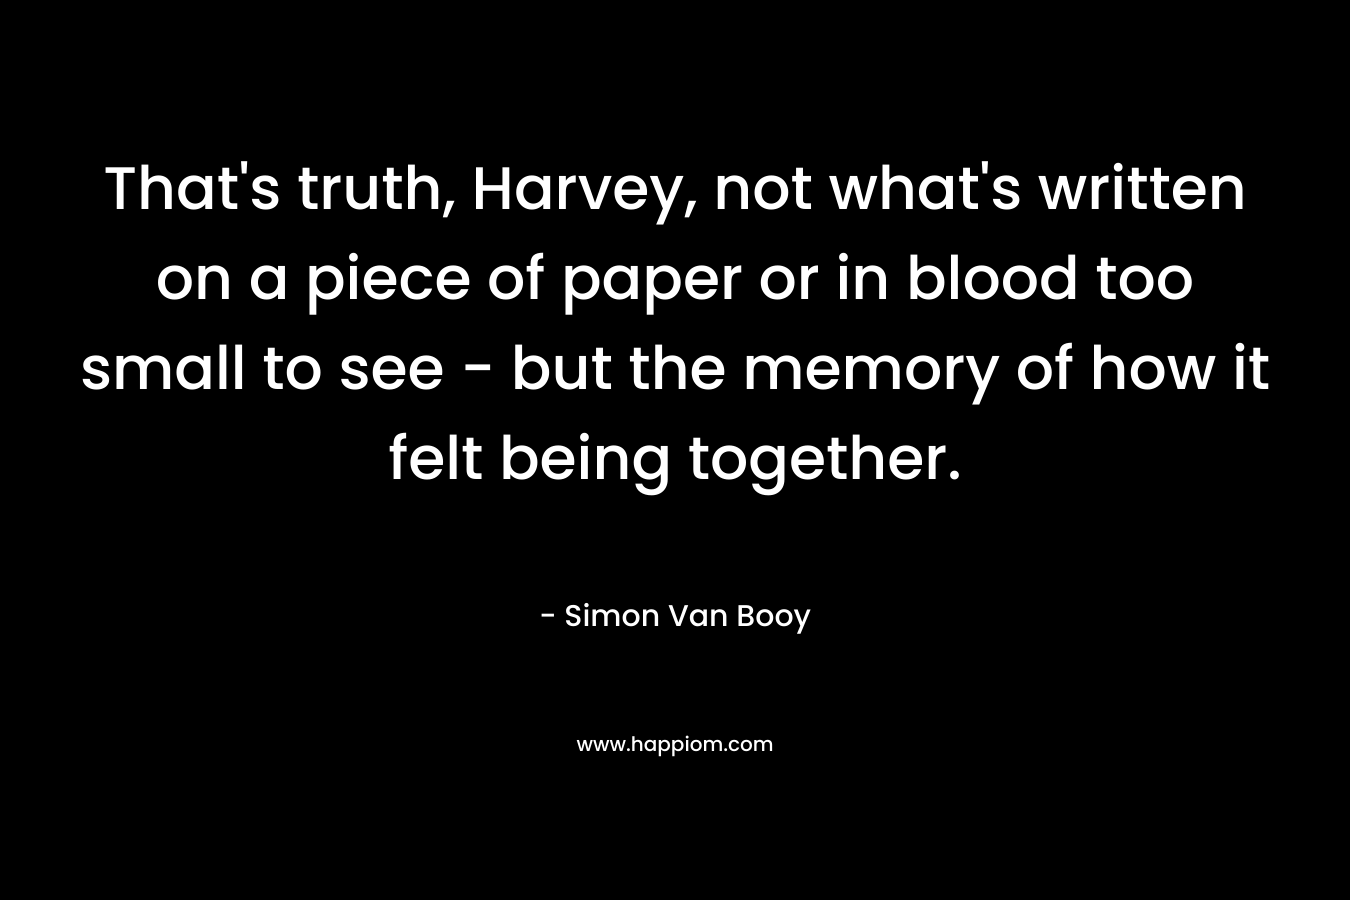 That's truth, Harvey, not what's written on a piece of paper or in blood too small to see - but the memory of how it felt being together.